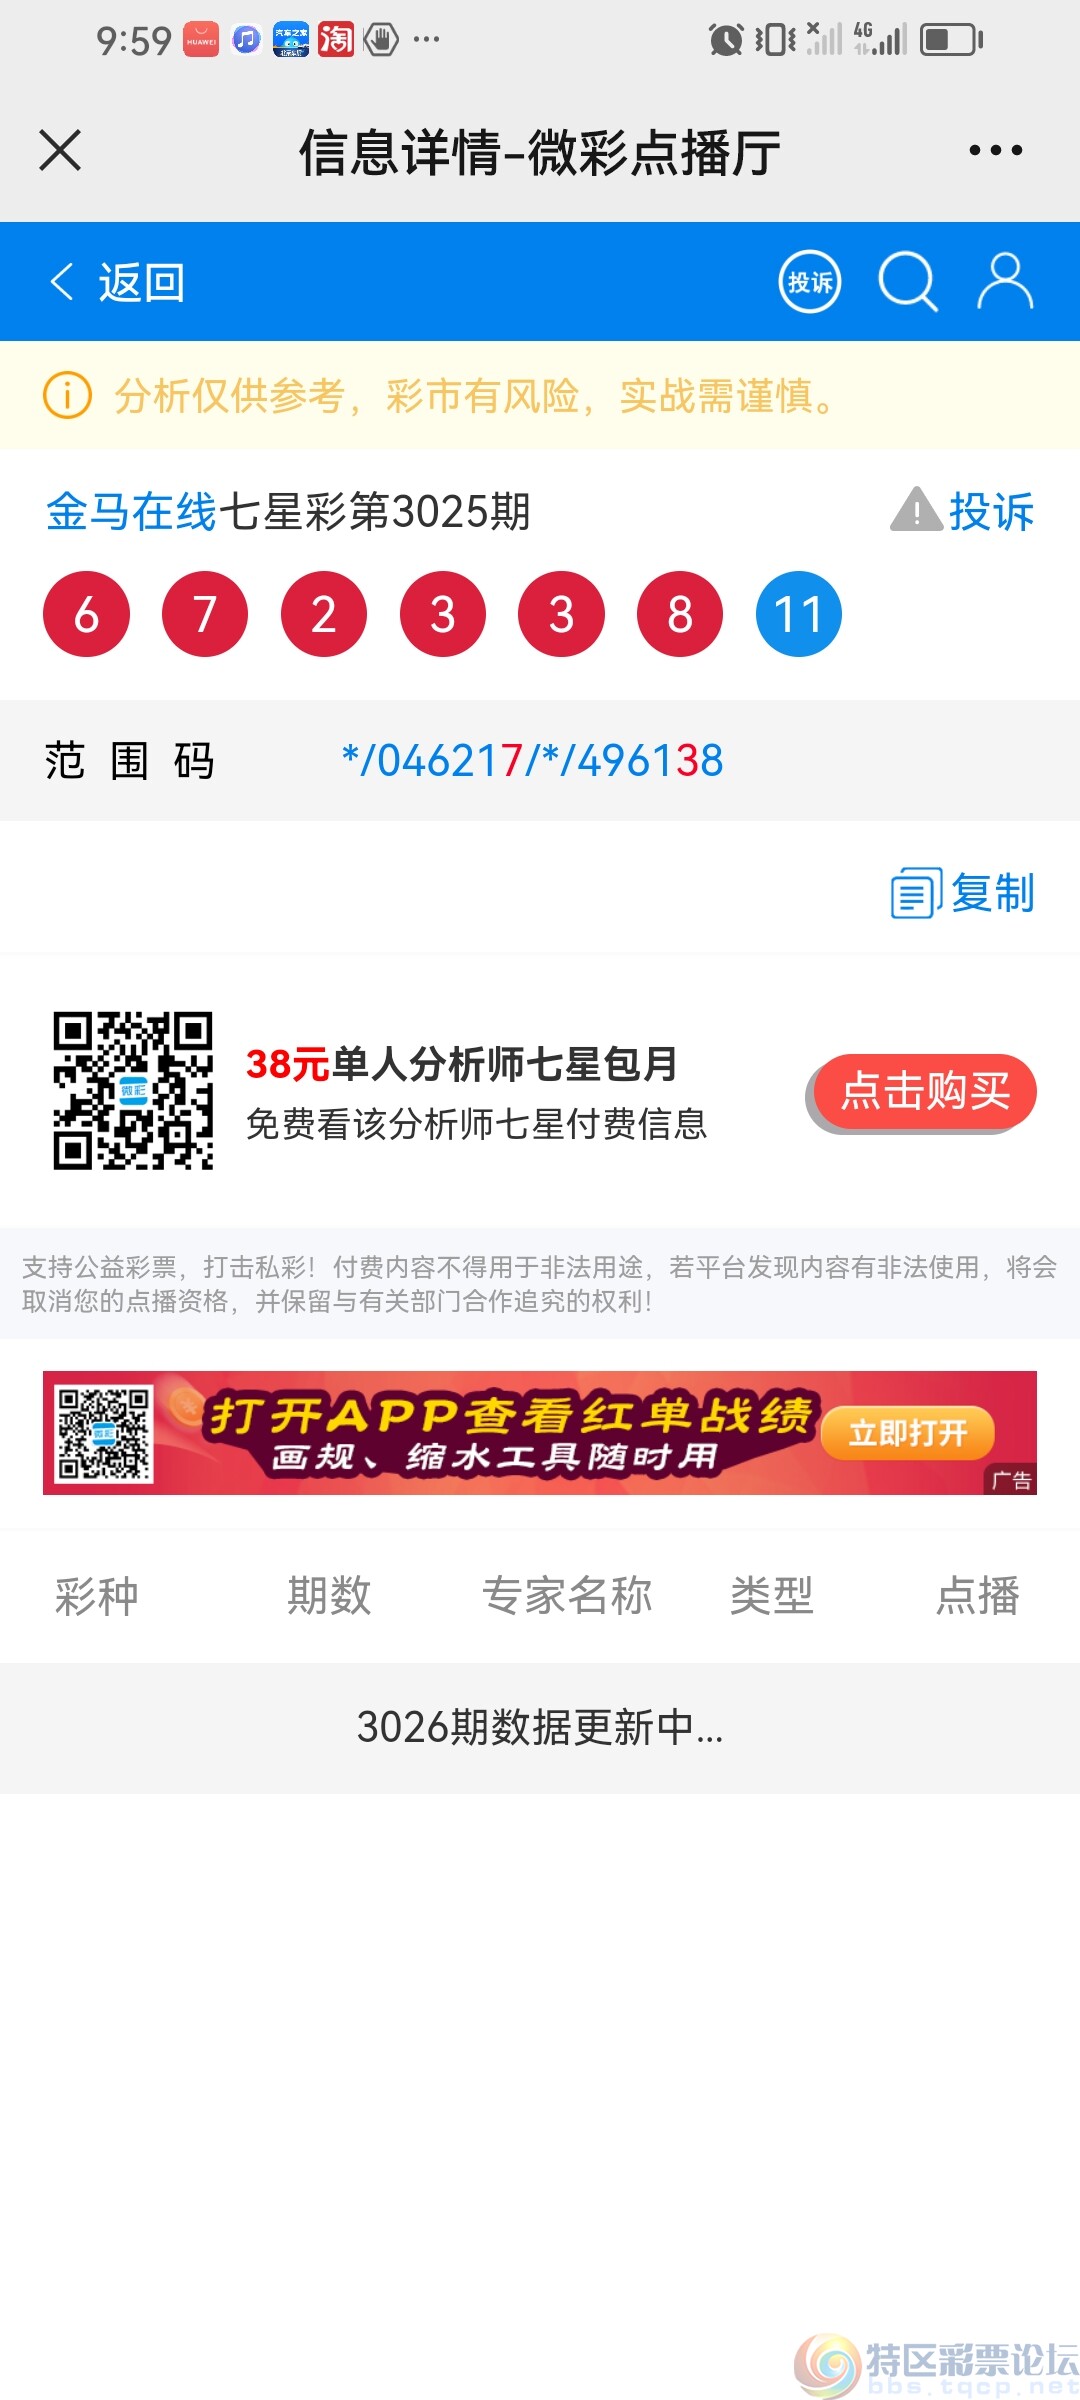 wechat_upload1713537476662281c4ad62a